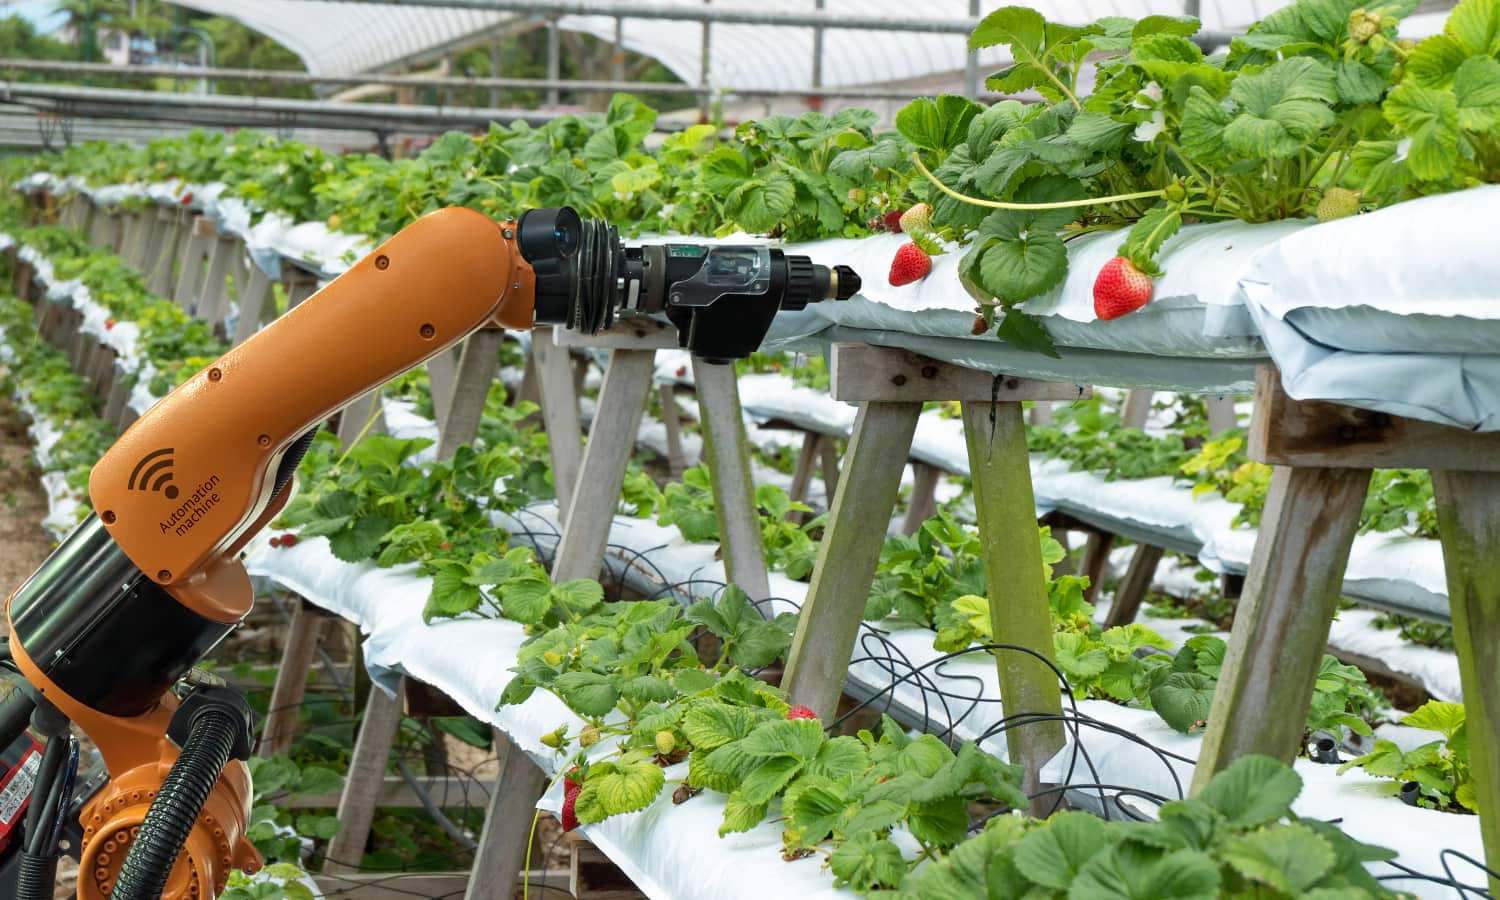 Current innovations in technology are impactful to the future of food, and can revolutionize the way we grow food over the coming years. Image Courtesy of Shutterstock Photographer Zapp2Photo